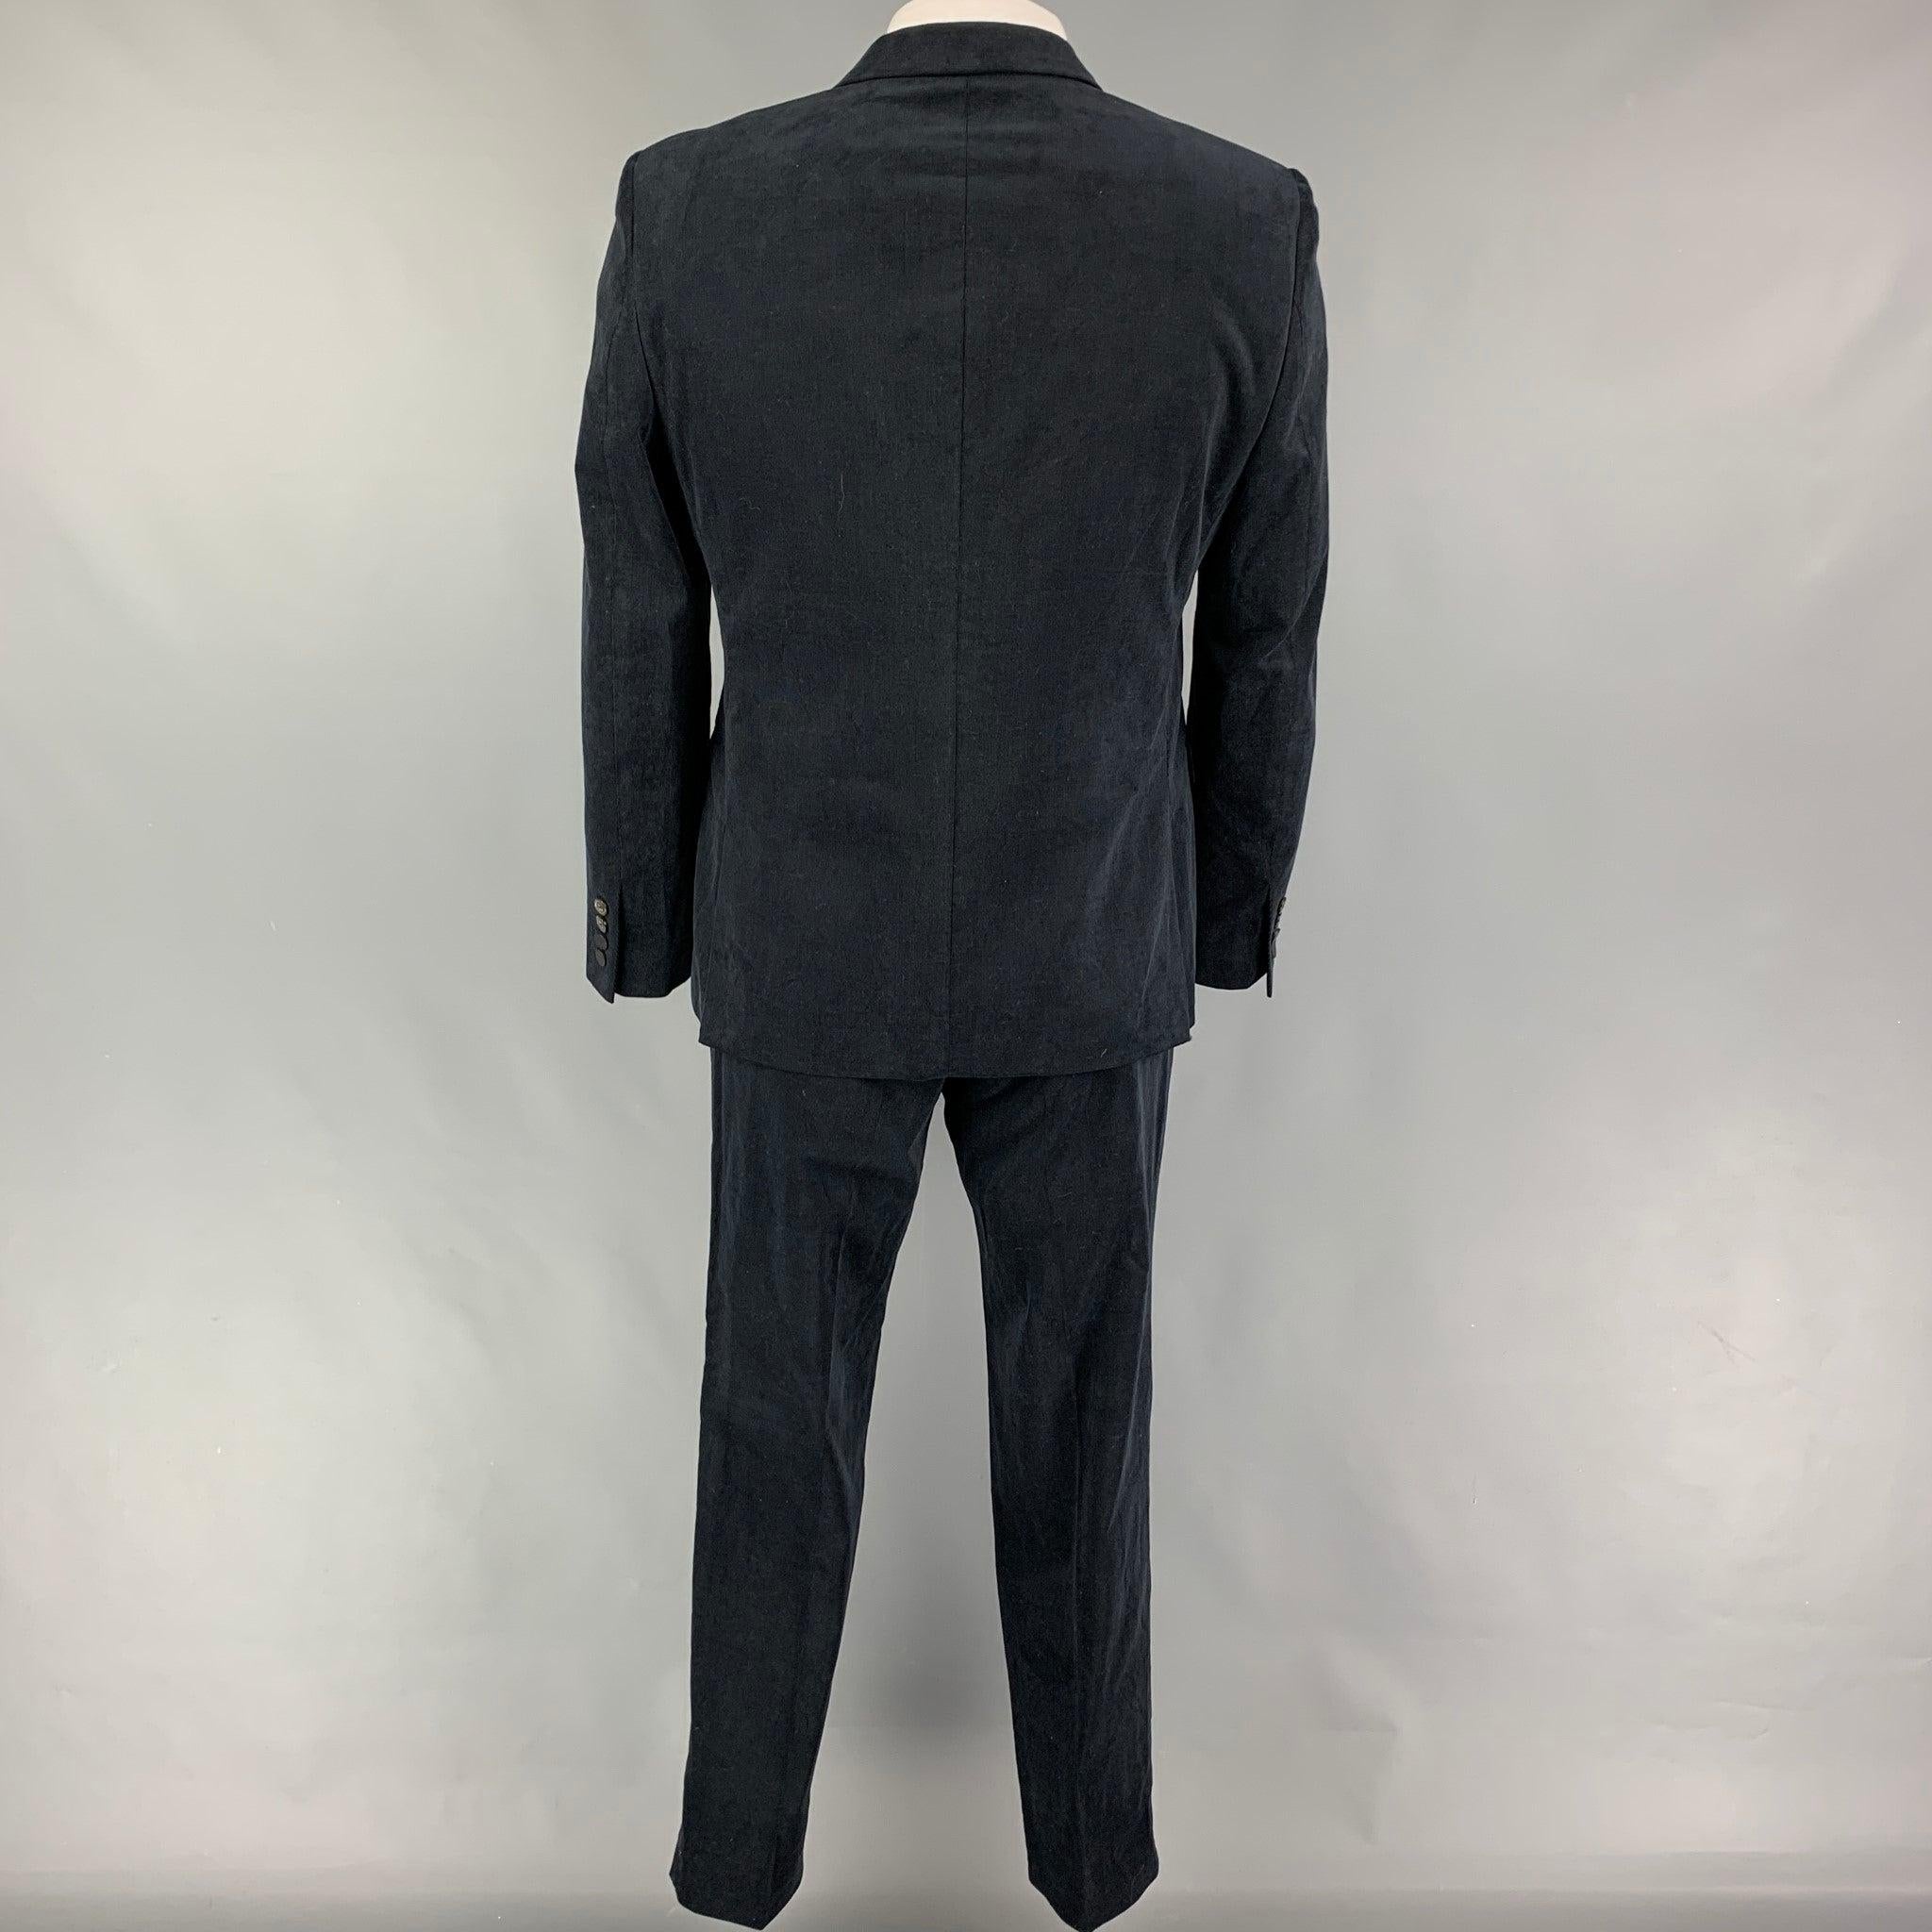 THE KOOPLES Size 42 Black Corduroy Cotton Notch Lapel Suit In Good Condition For Sale In San Francisco, CA